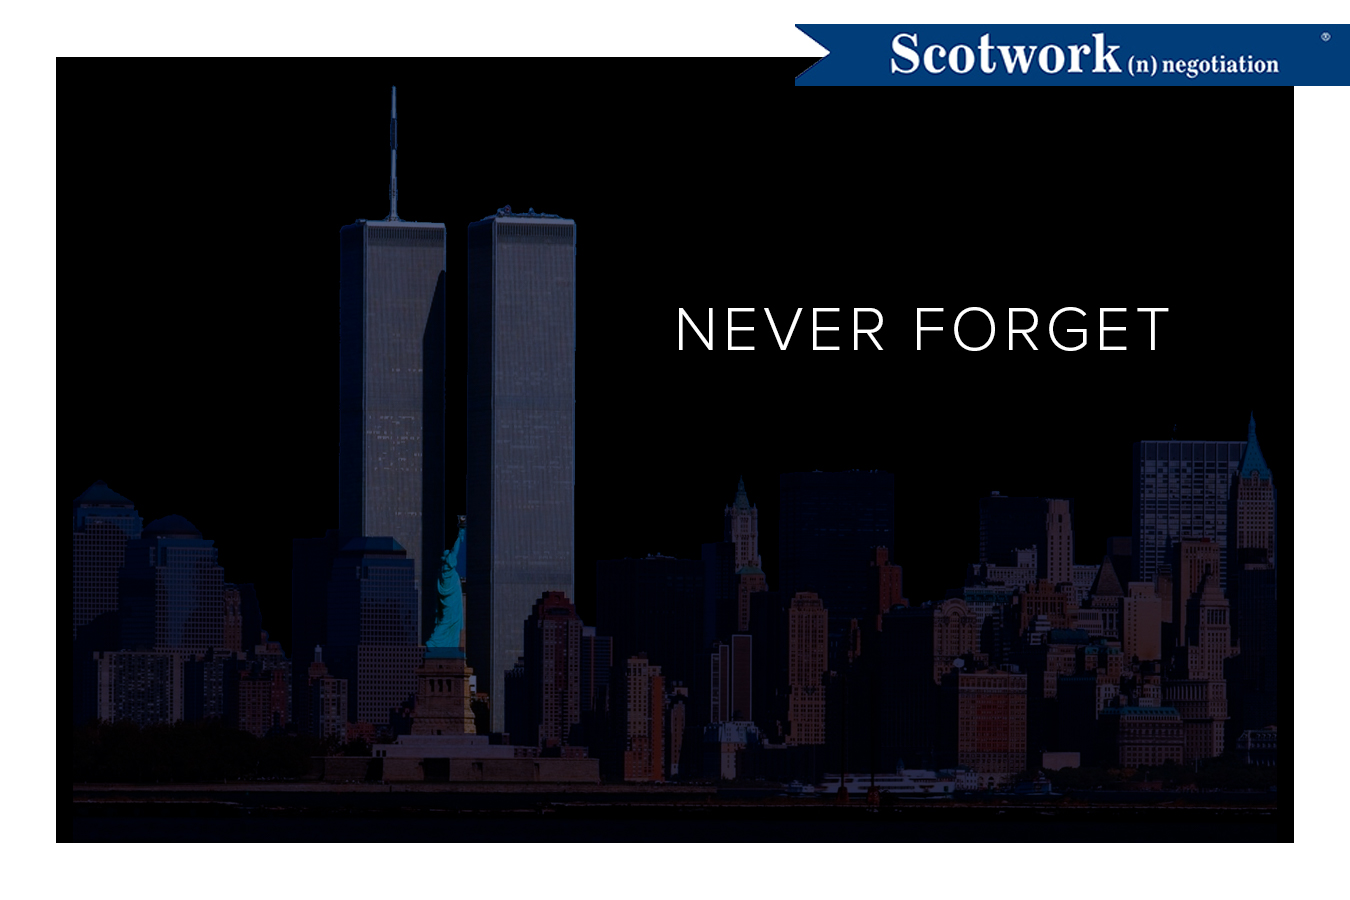 2020_09_14-never-forget.jpg